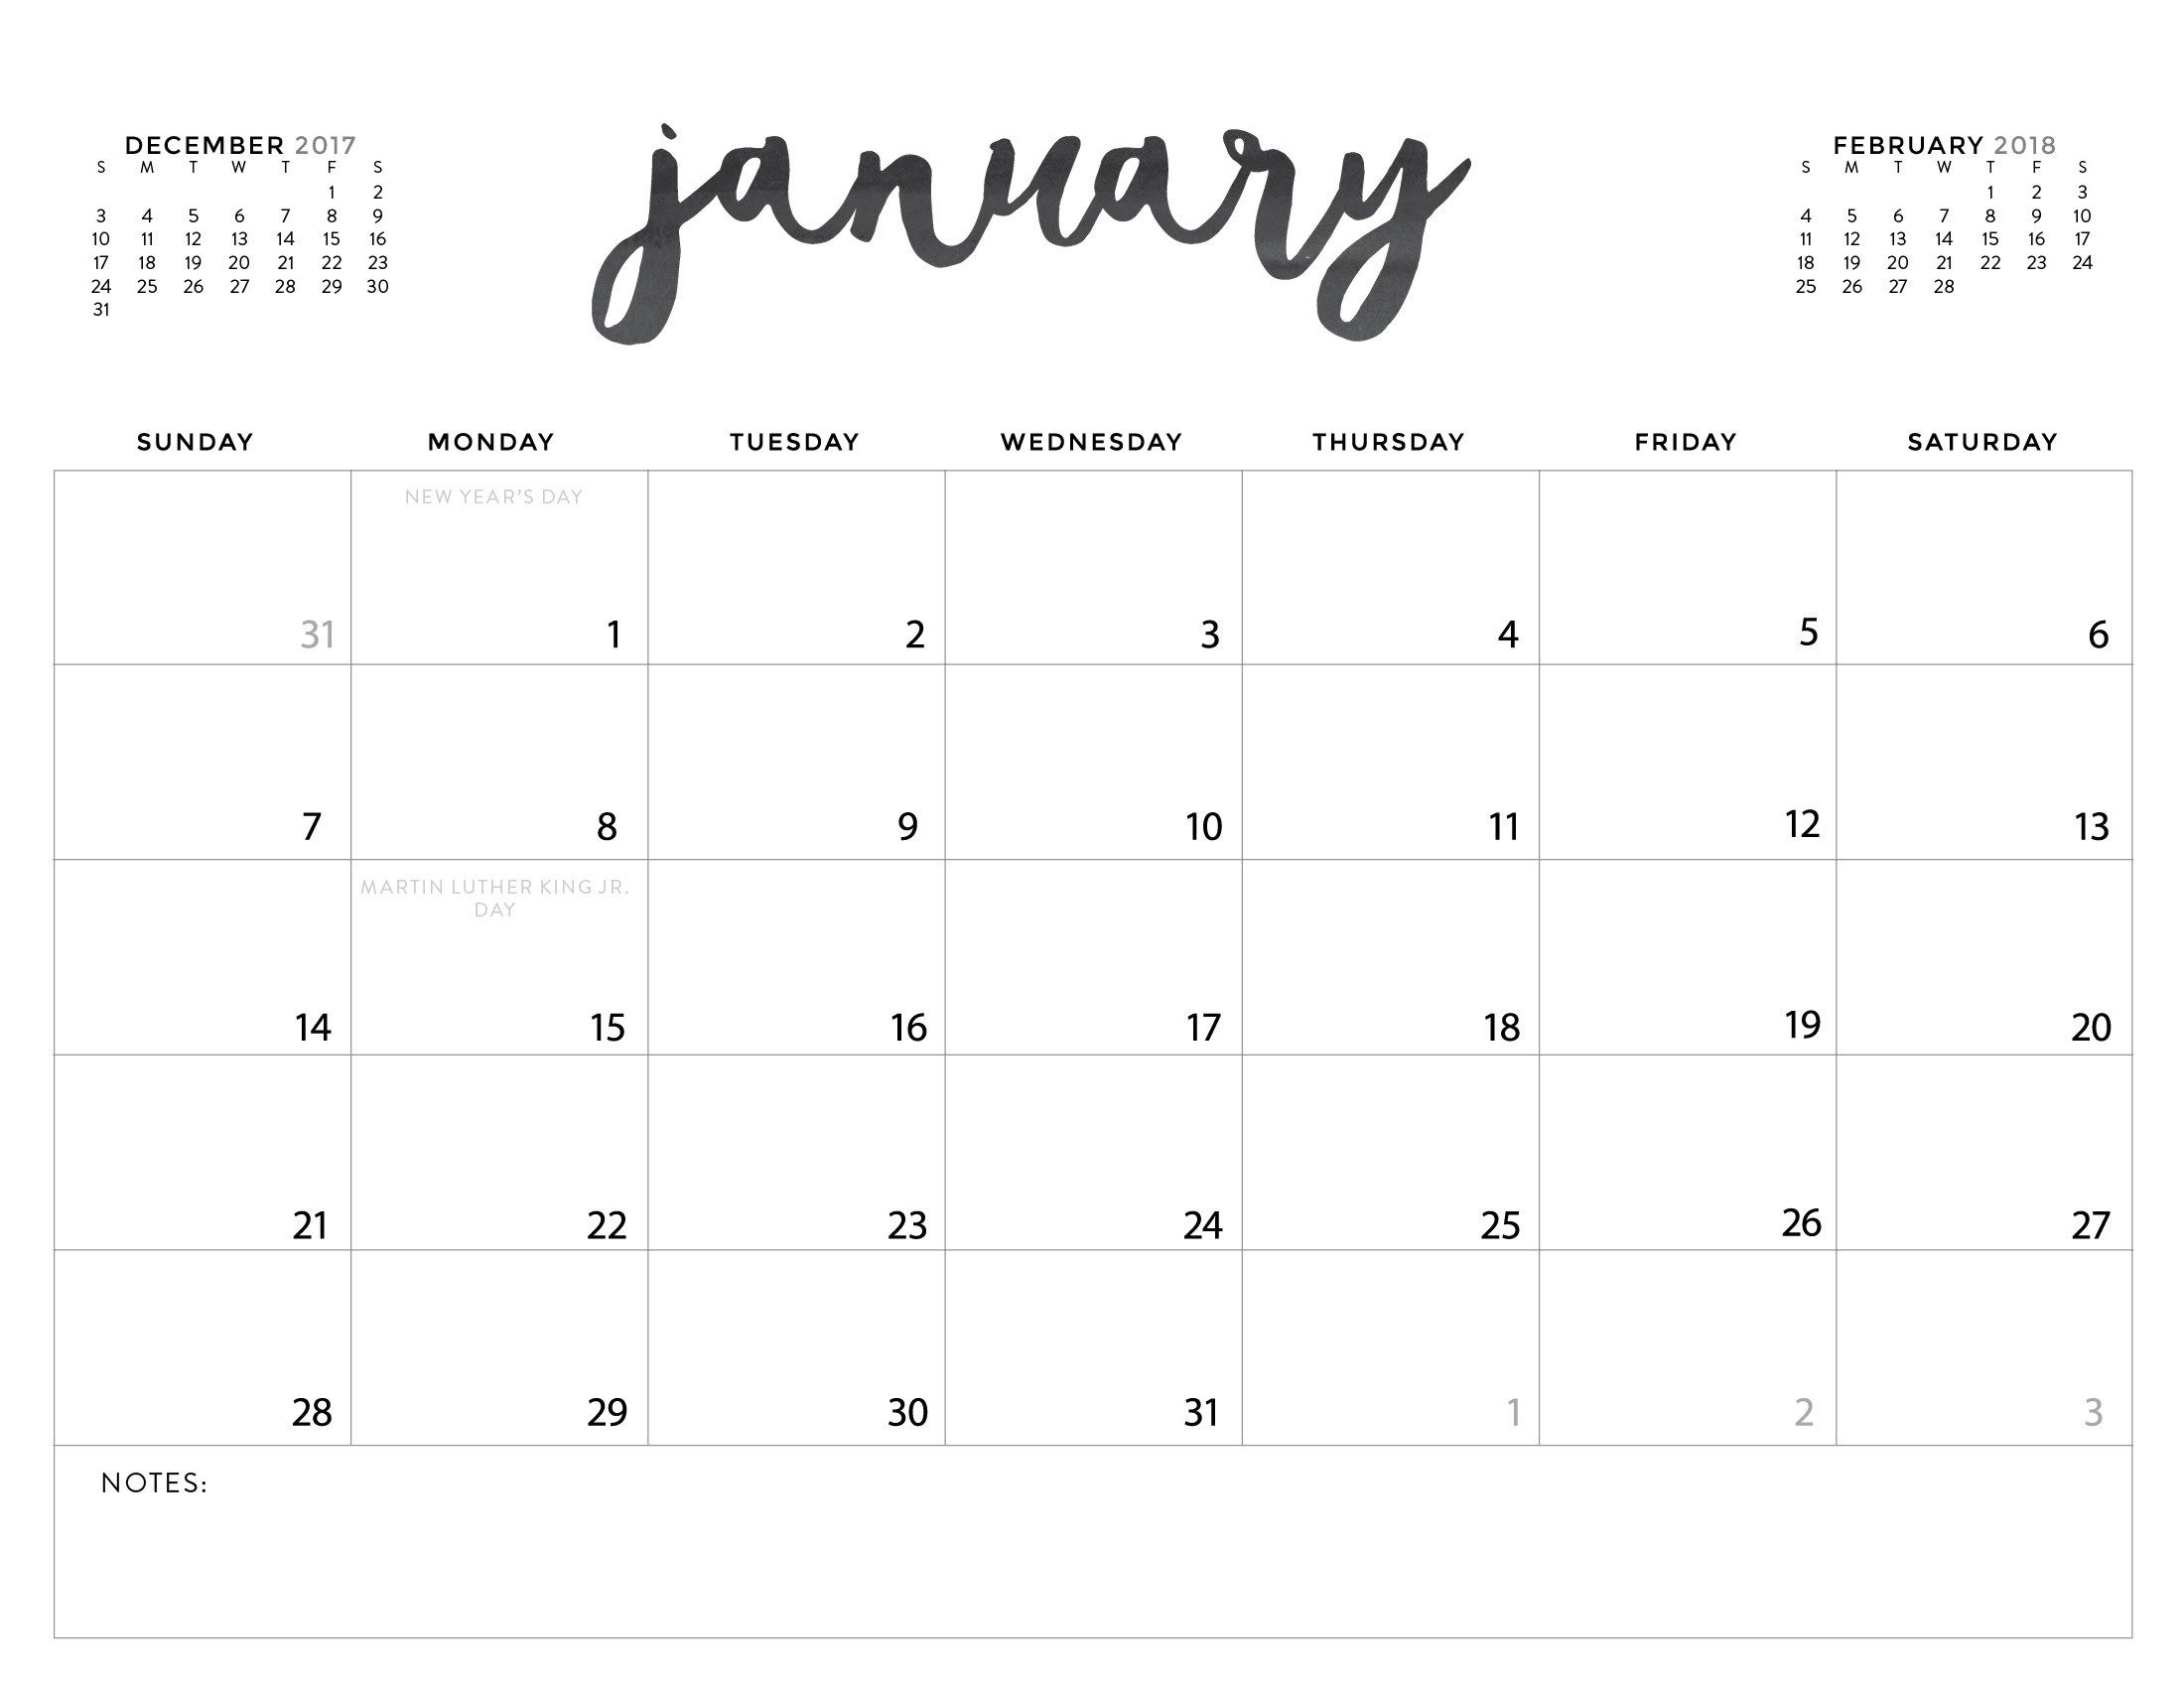 Download Your Free 2018 Printable Calendars Today! There Are 28 - Free Printable Ruler